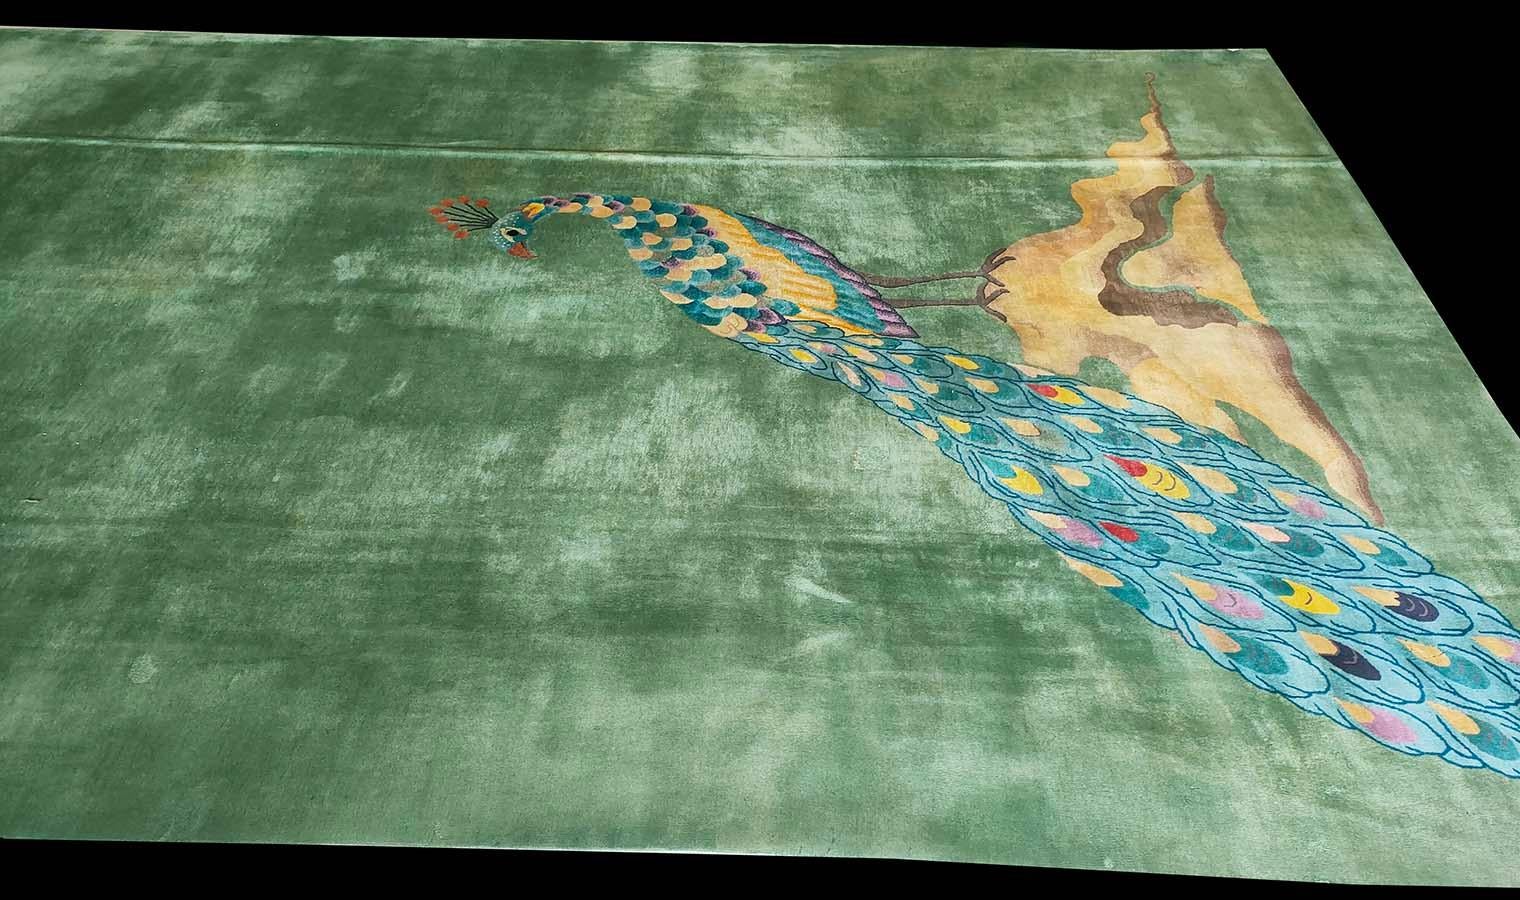 Early 20th Century 1920s Chinese Art Deco Carpet ( 9' x 14' - 275 x 435 cm ) For Sale